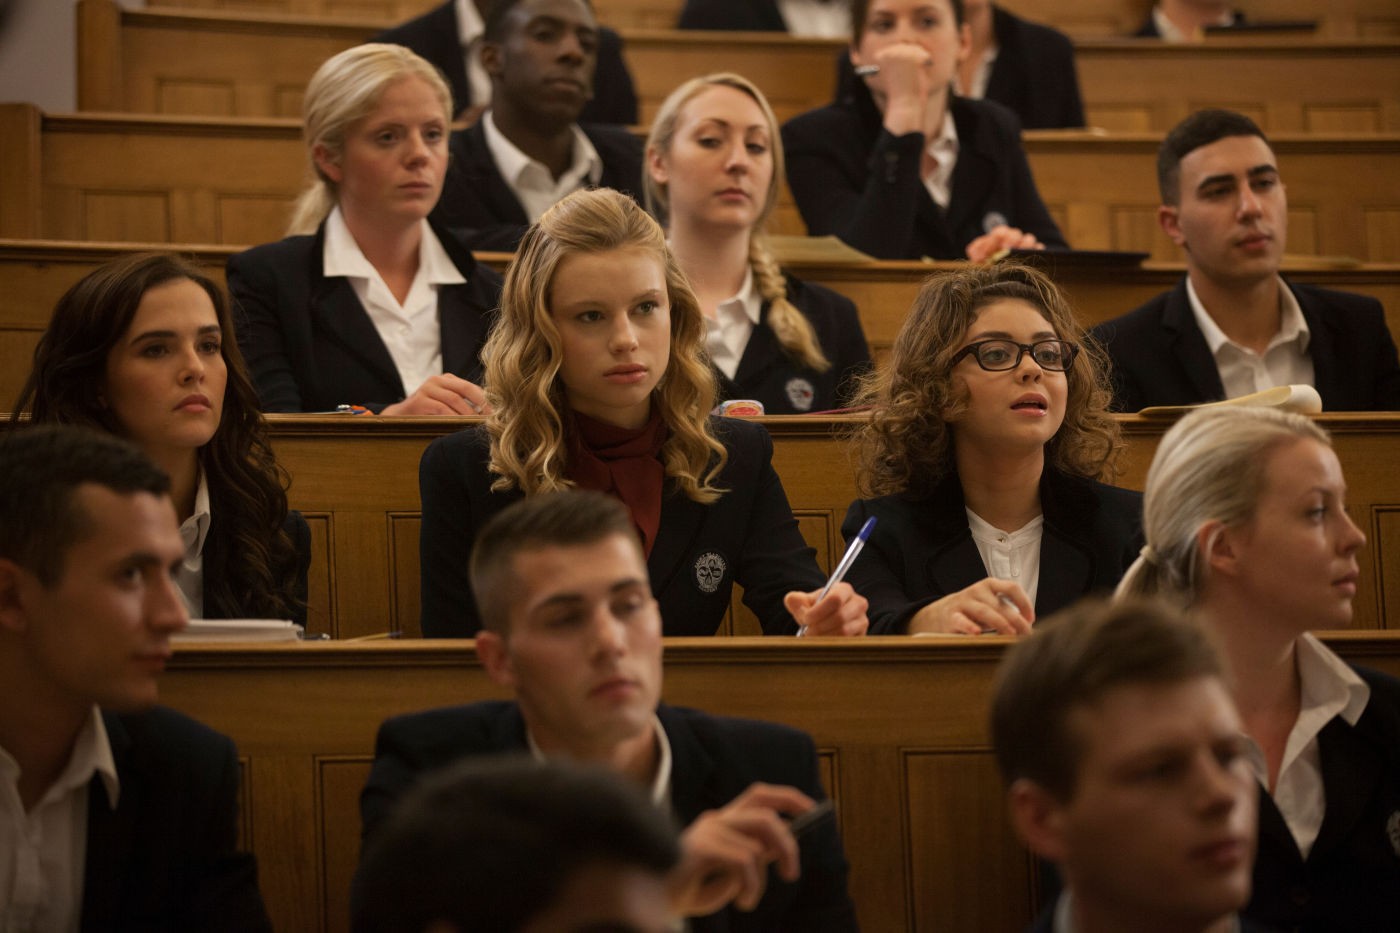 Zoey Deutch, Lucy Fry and Sarah Hyland in The Weinstein Company's Vampire Academy (2014)